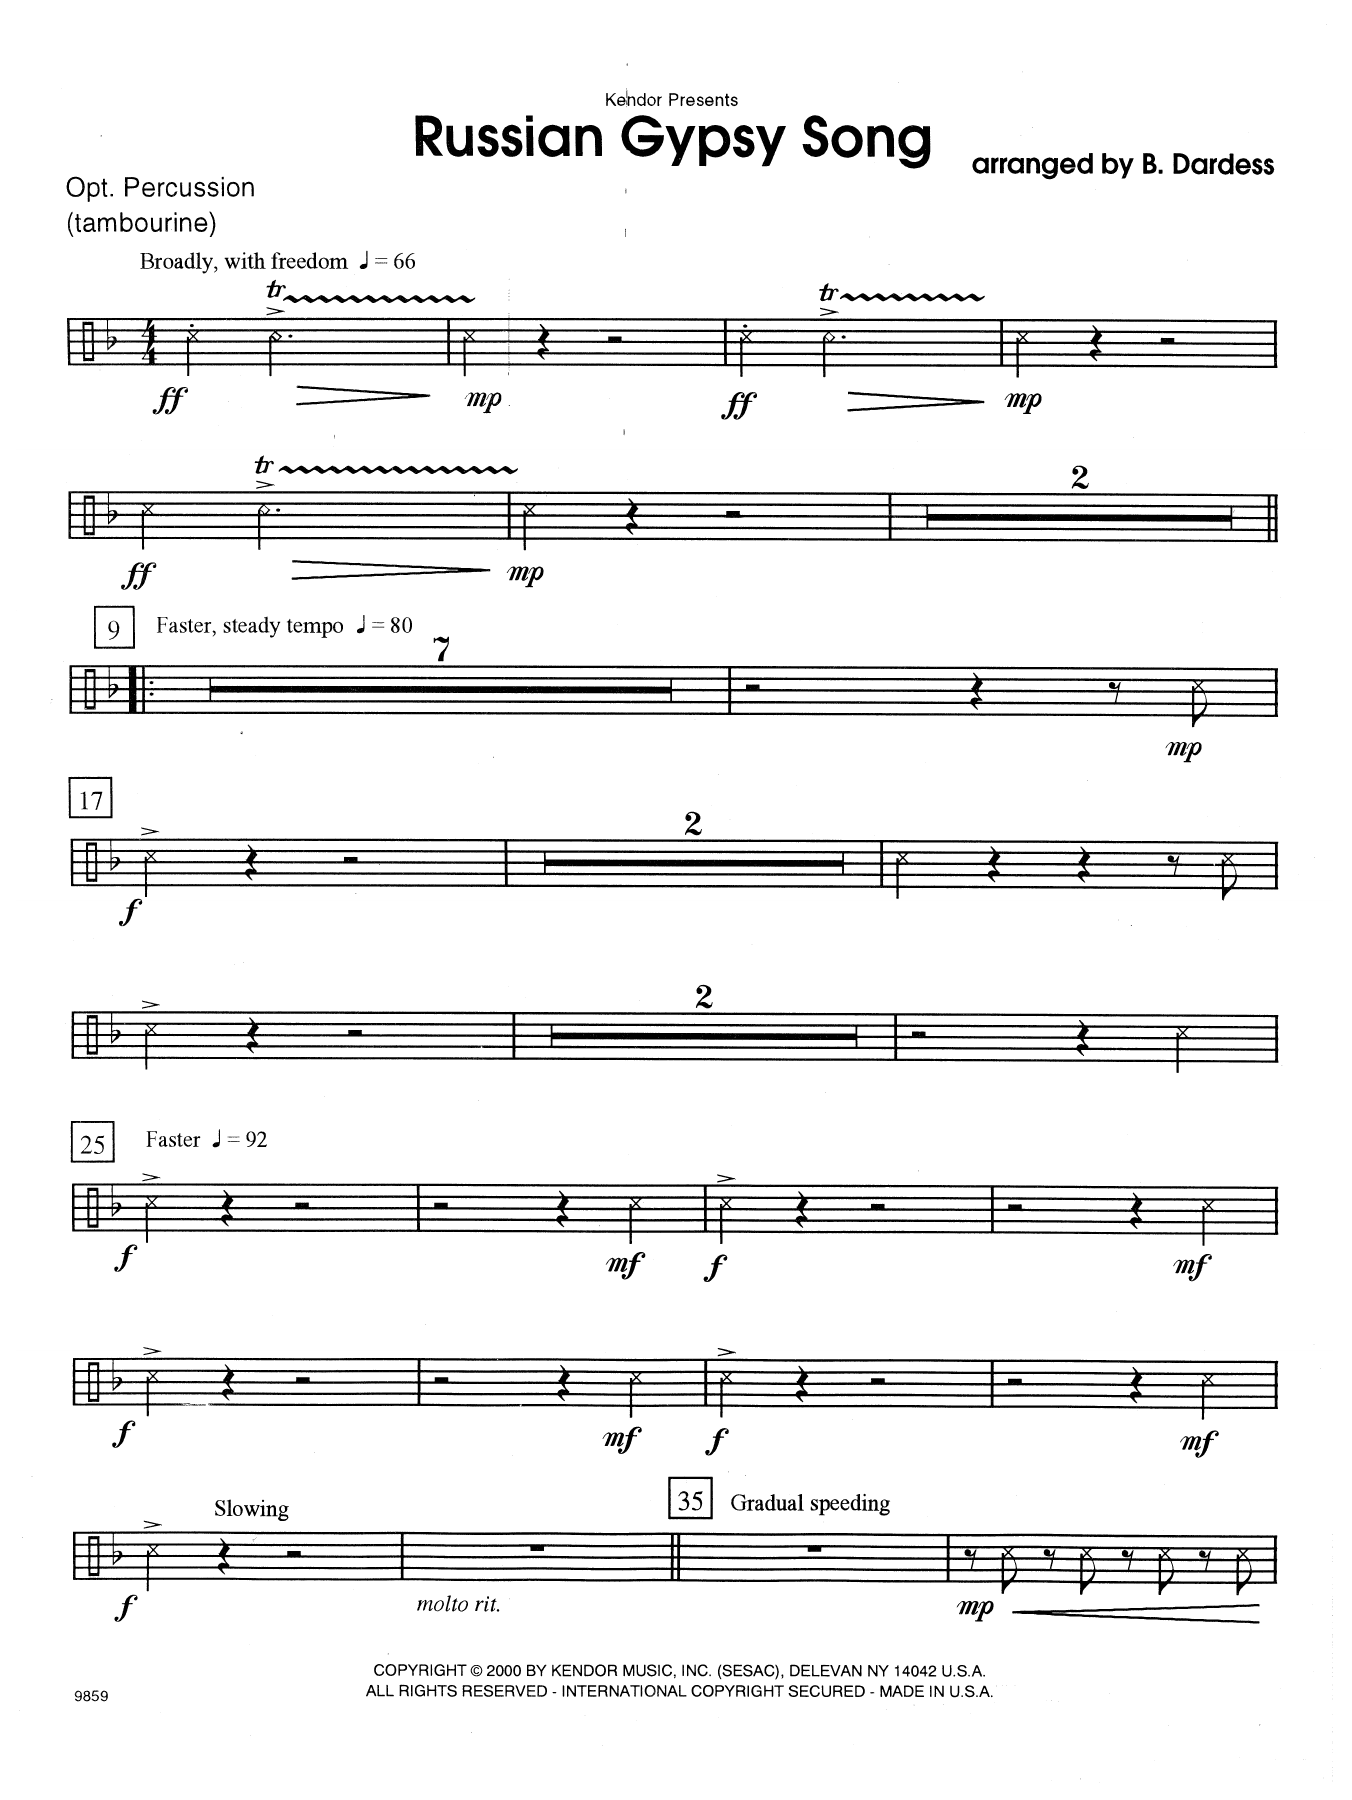 Download Betty Dardess Russian Gypsy Song - Percussion Sheet Music